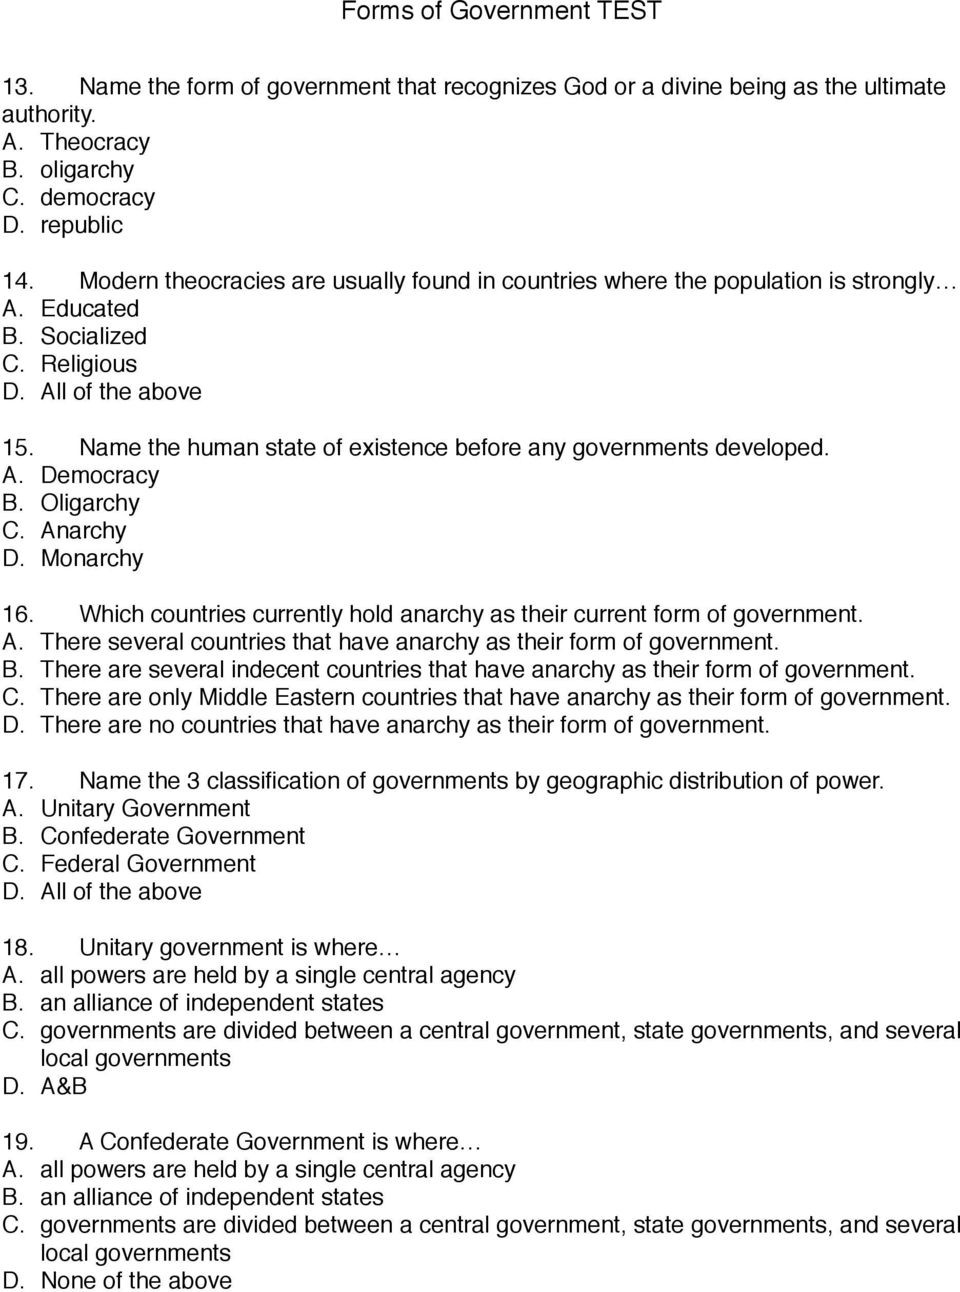 Forms Of Government Worksheet forms Of Government Test Pdf Free Download